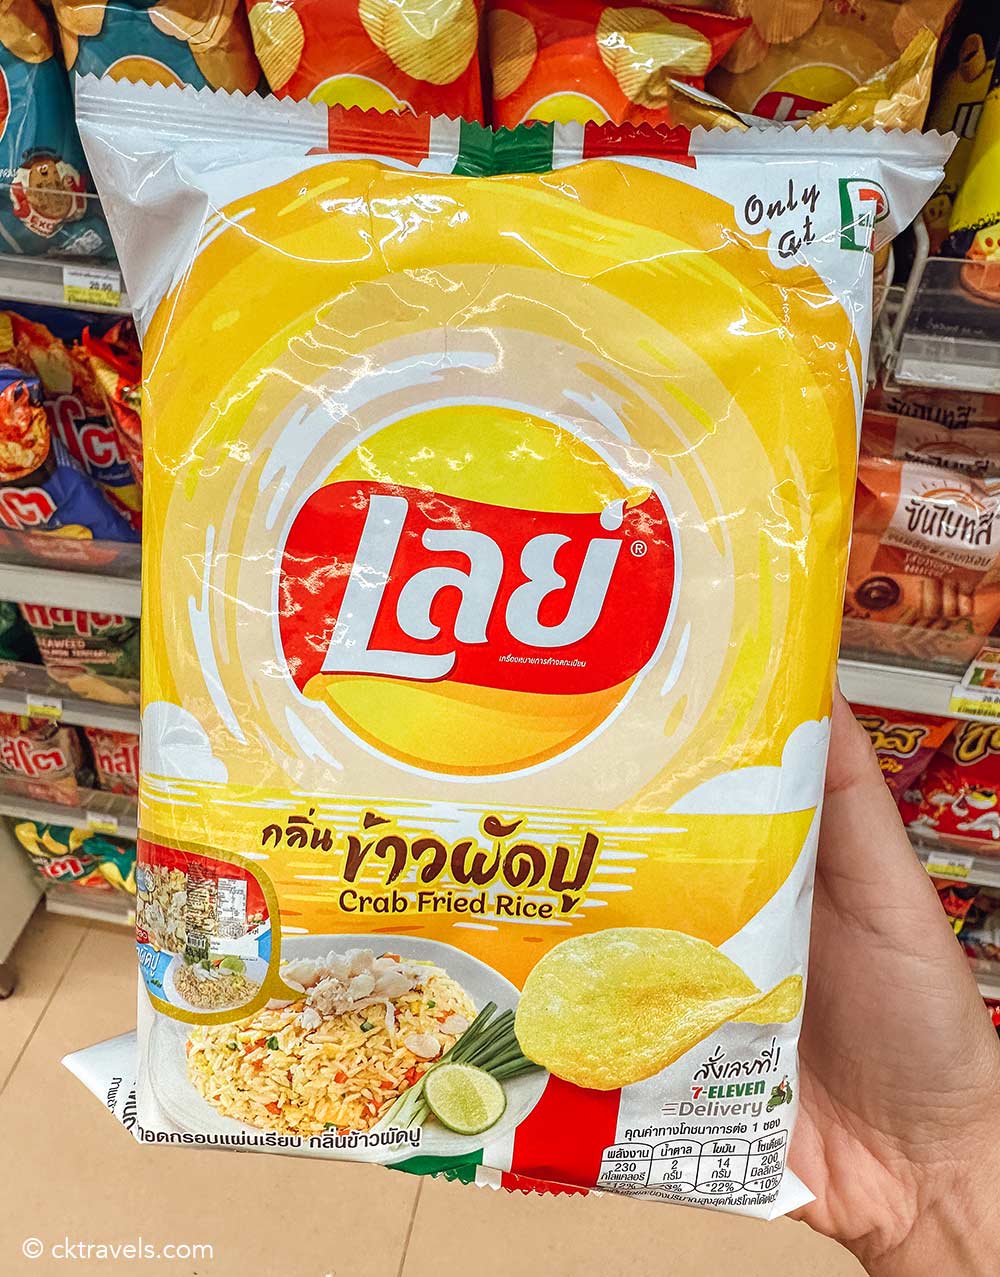 Lay’s Crab Fried Rice limited edition potato chips crisps Thailand 7-eleven